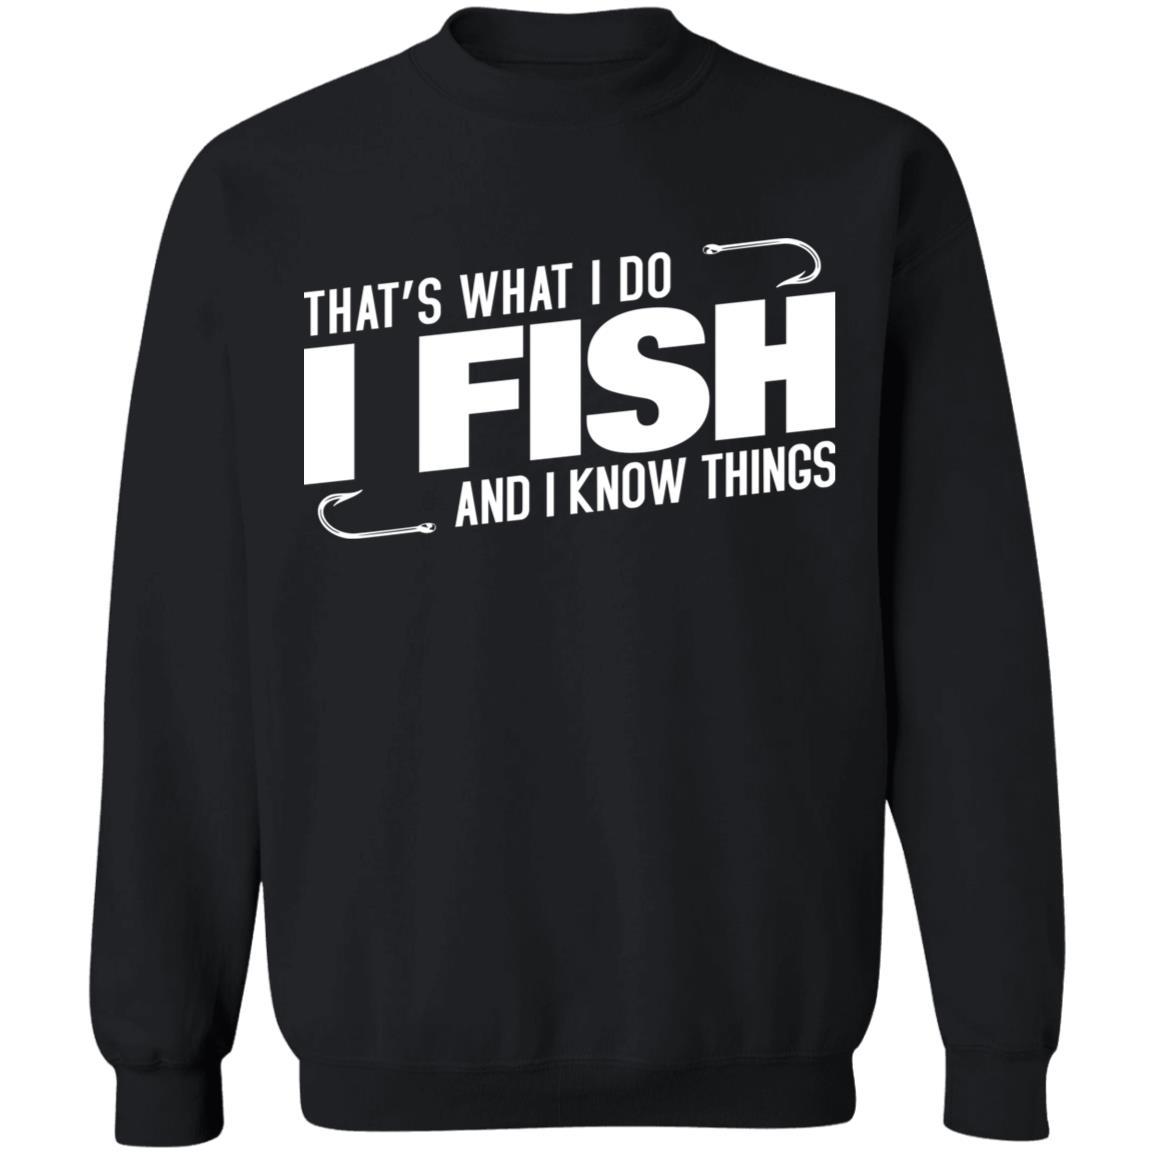 That's what i do i fish and i know things sweatshirt i black